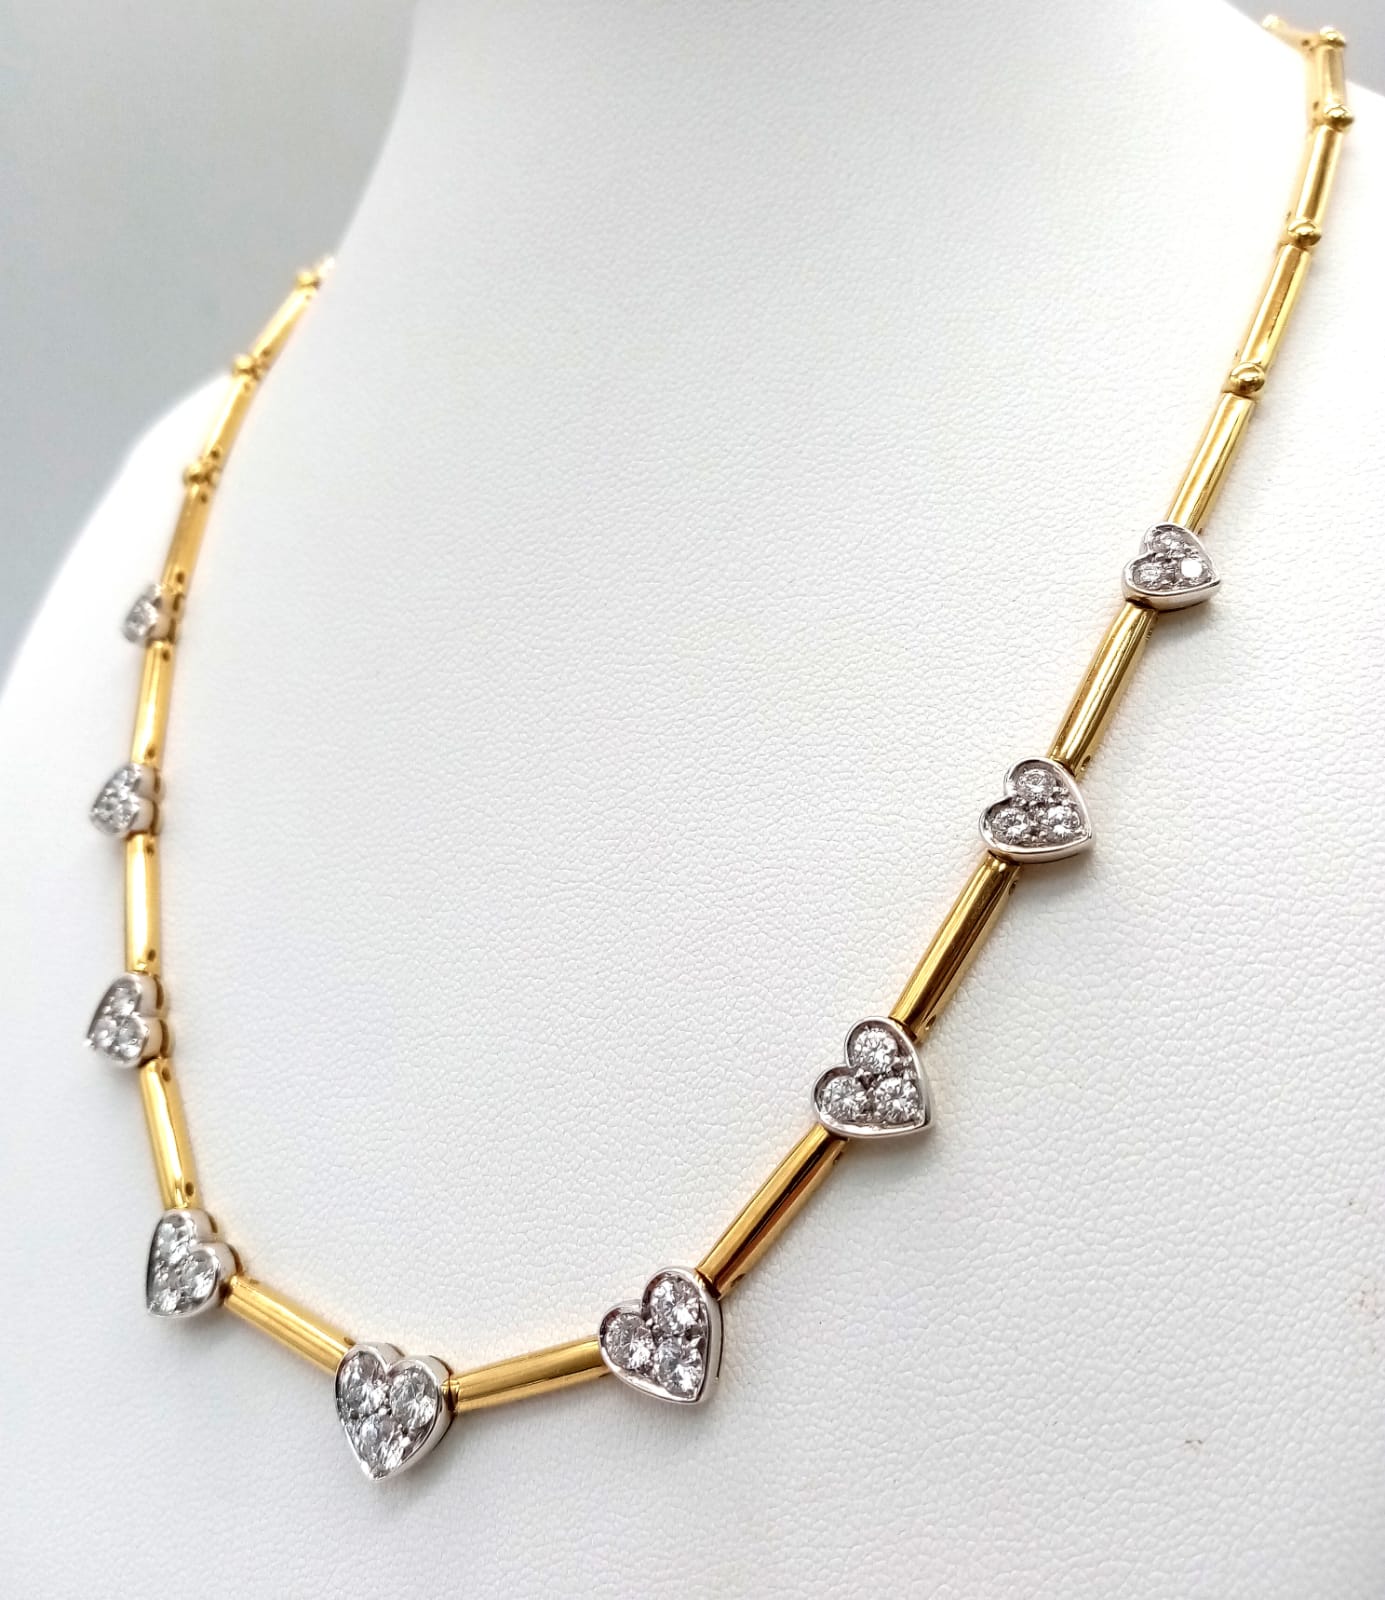 A Gorgeous 18K Gold and Heart-Diamond Necklace and Bracelet Set. The necklace is decorated with - Image 13 of 21